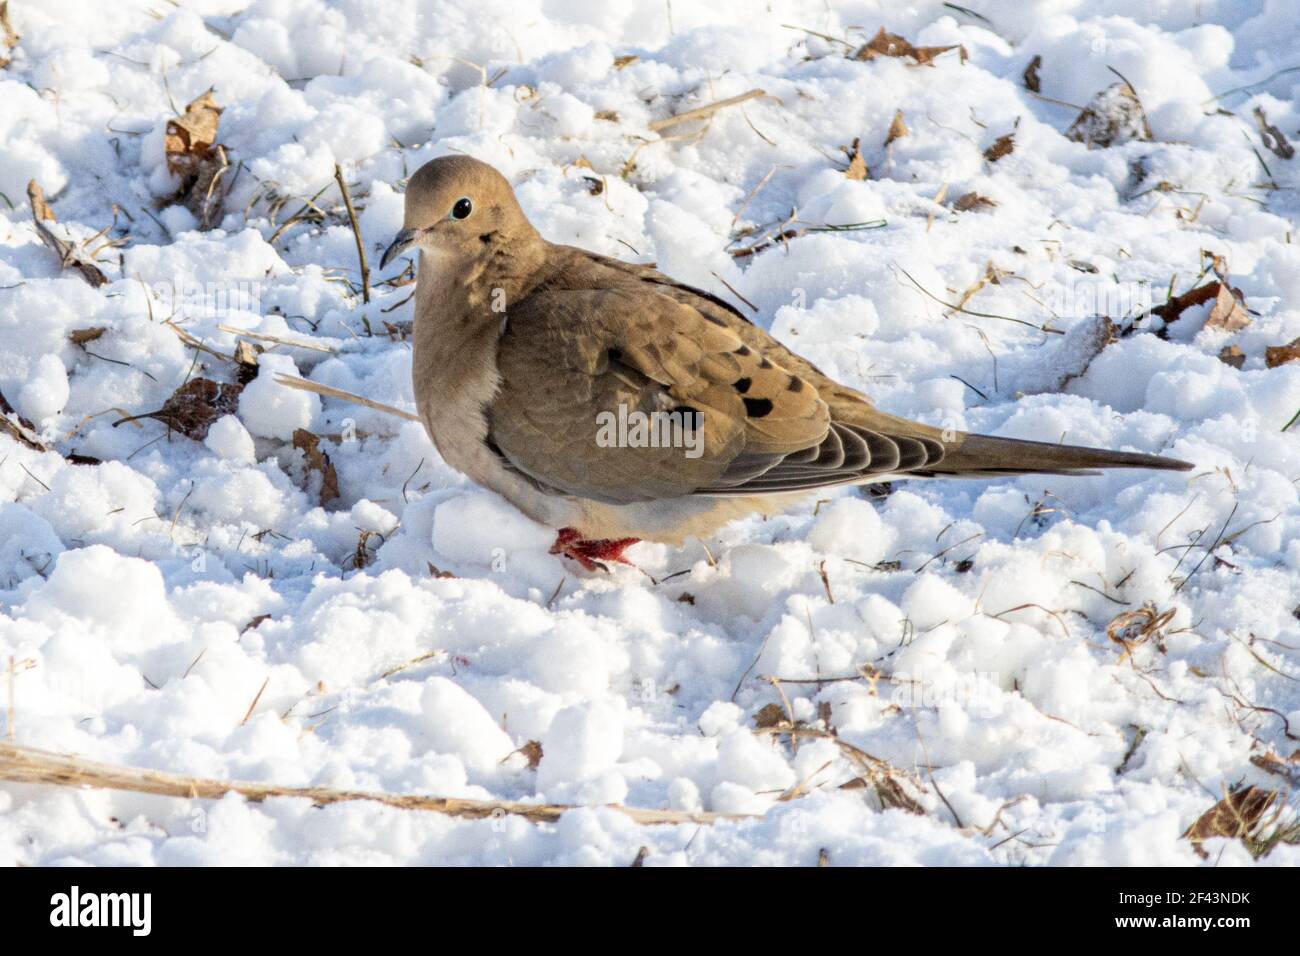 A mourning dove on the ground in snow Stock Photo